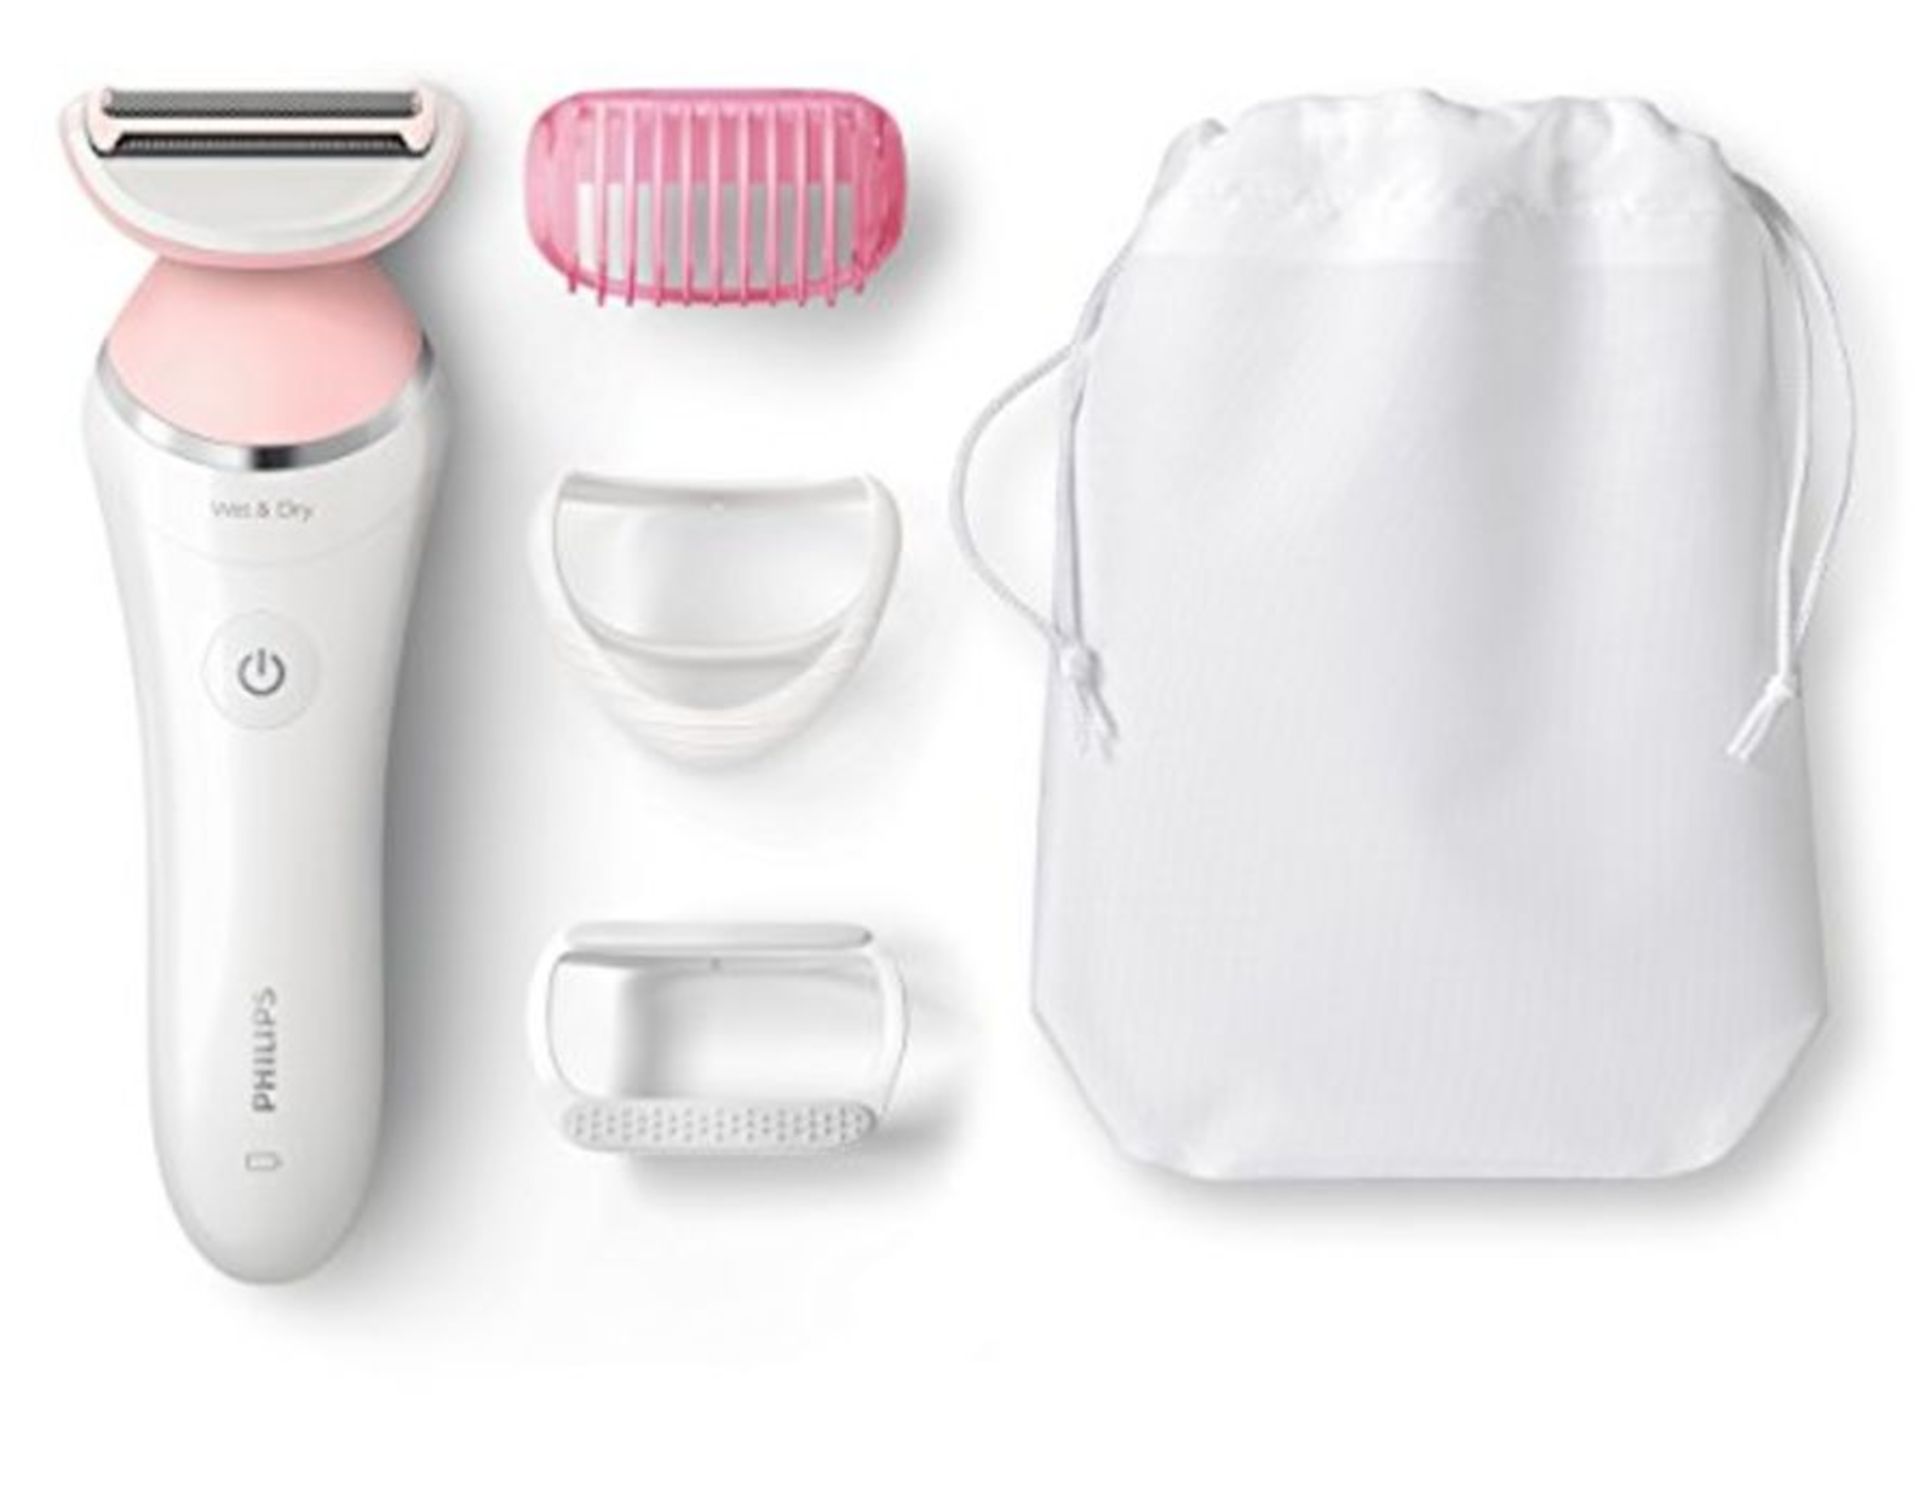 Philips SatinShave Advanced Wet and Dry Rechargeable Lady Shaver, Cordless Electric Ra